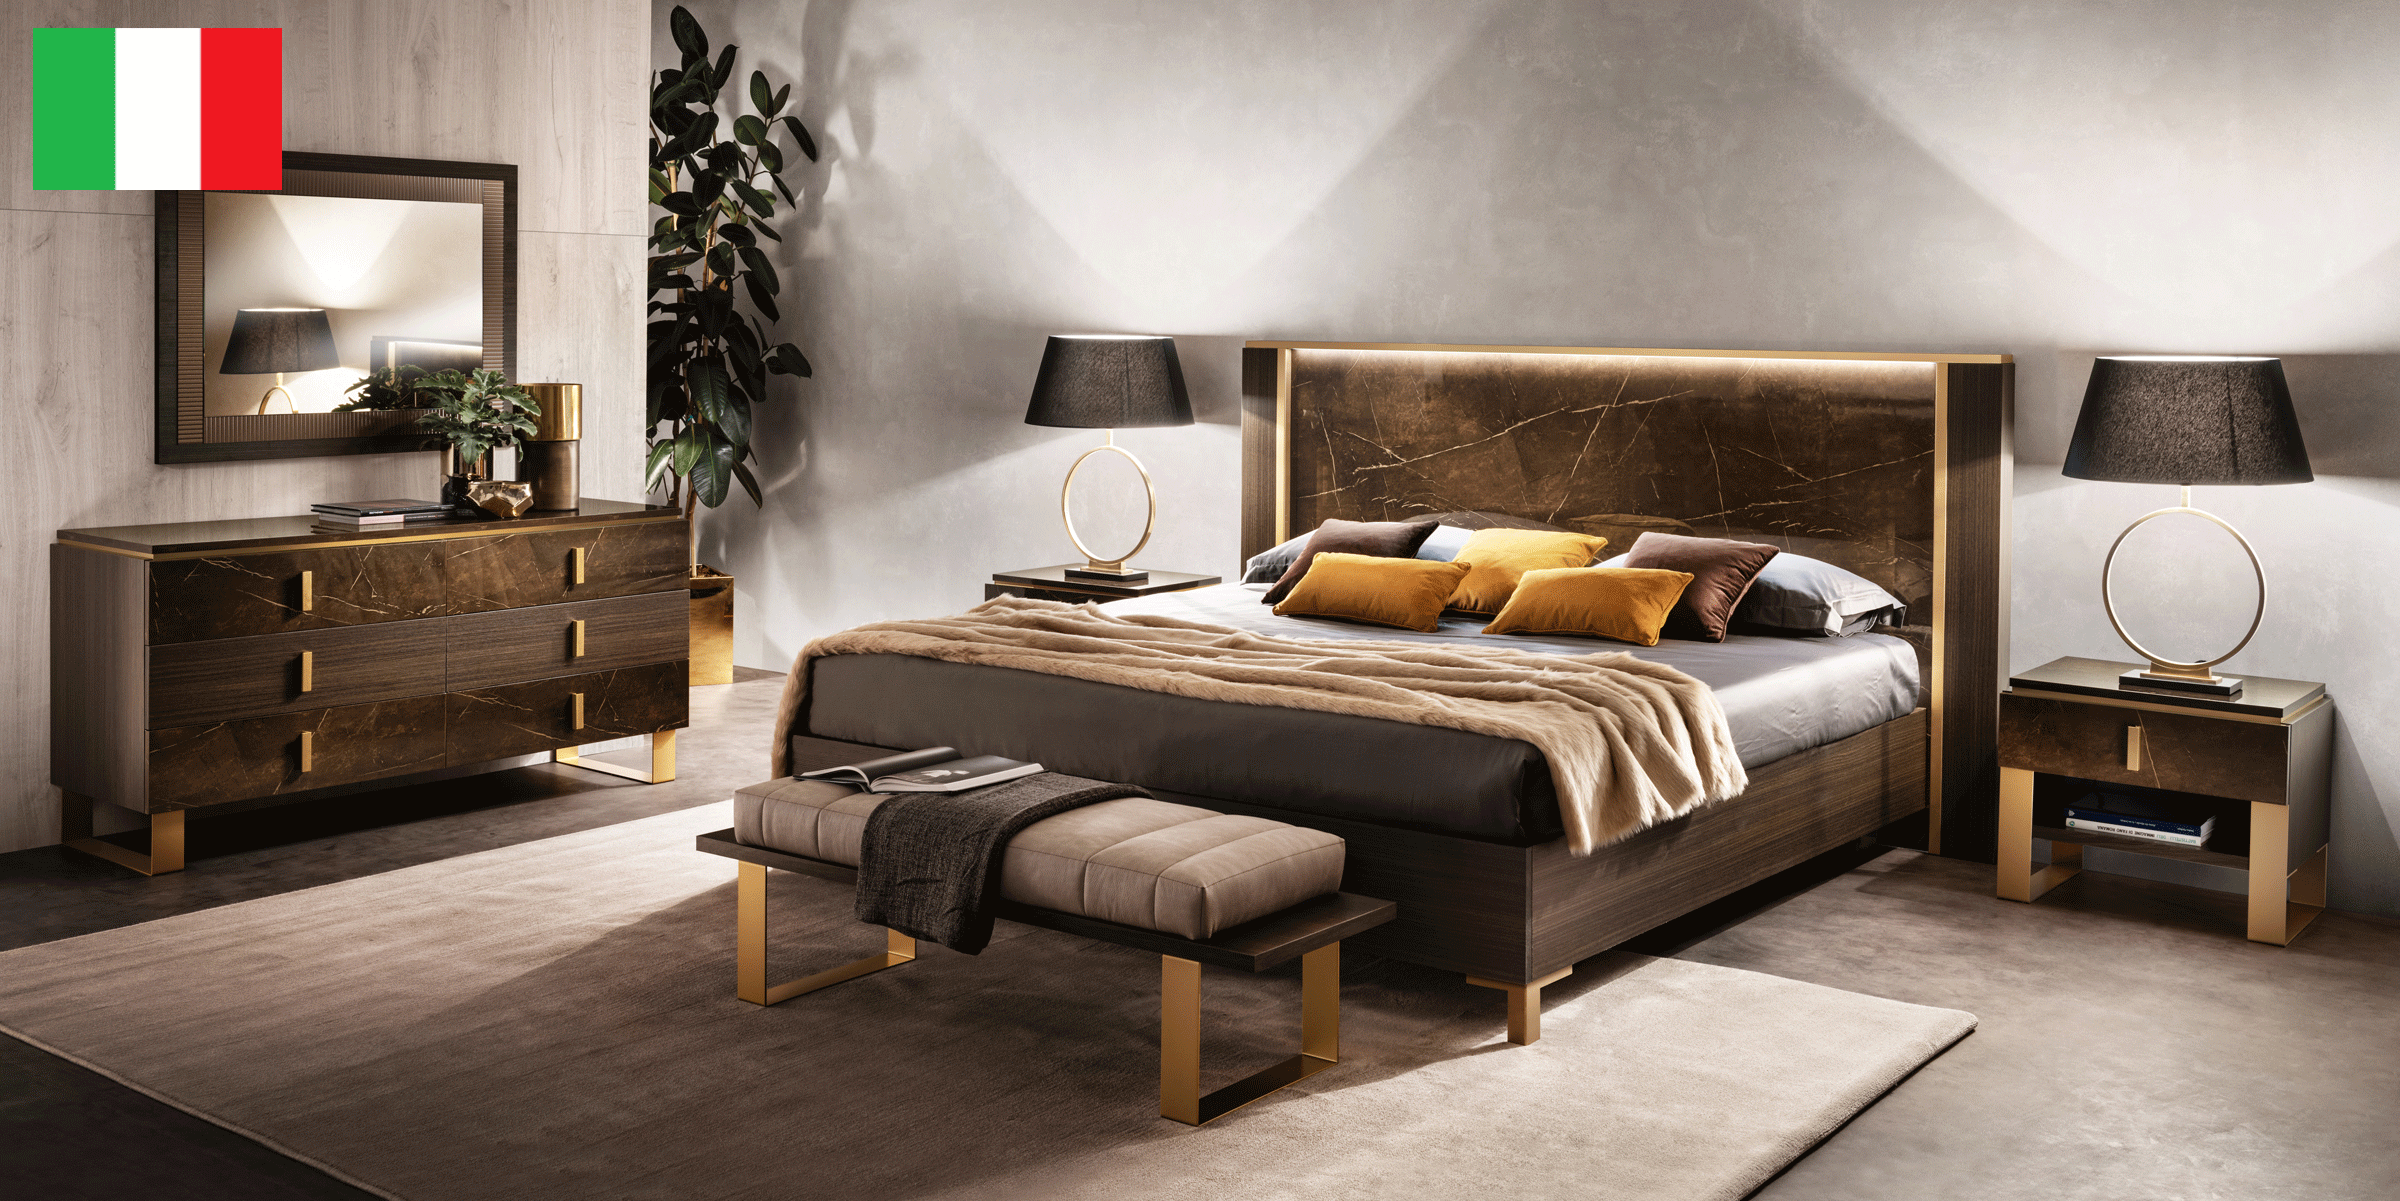 Bedroom Furniture Classic Bedrooms QS and KS Essenza Bedroom by Arredoclassic, Italy